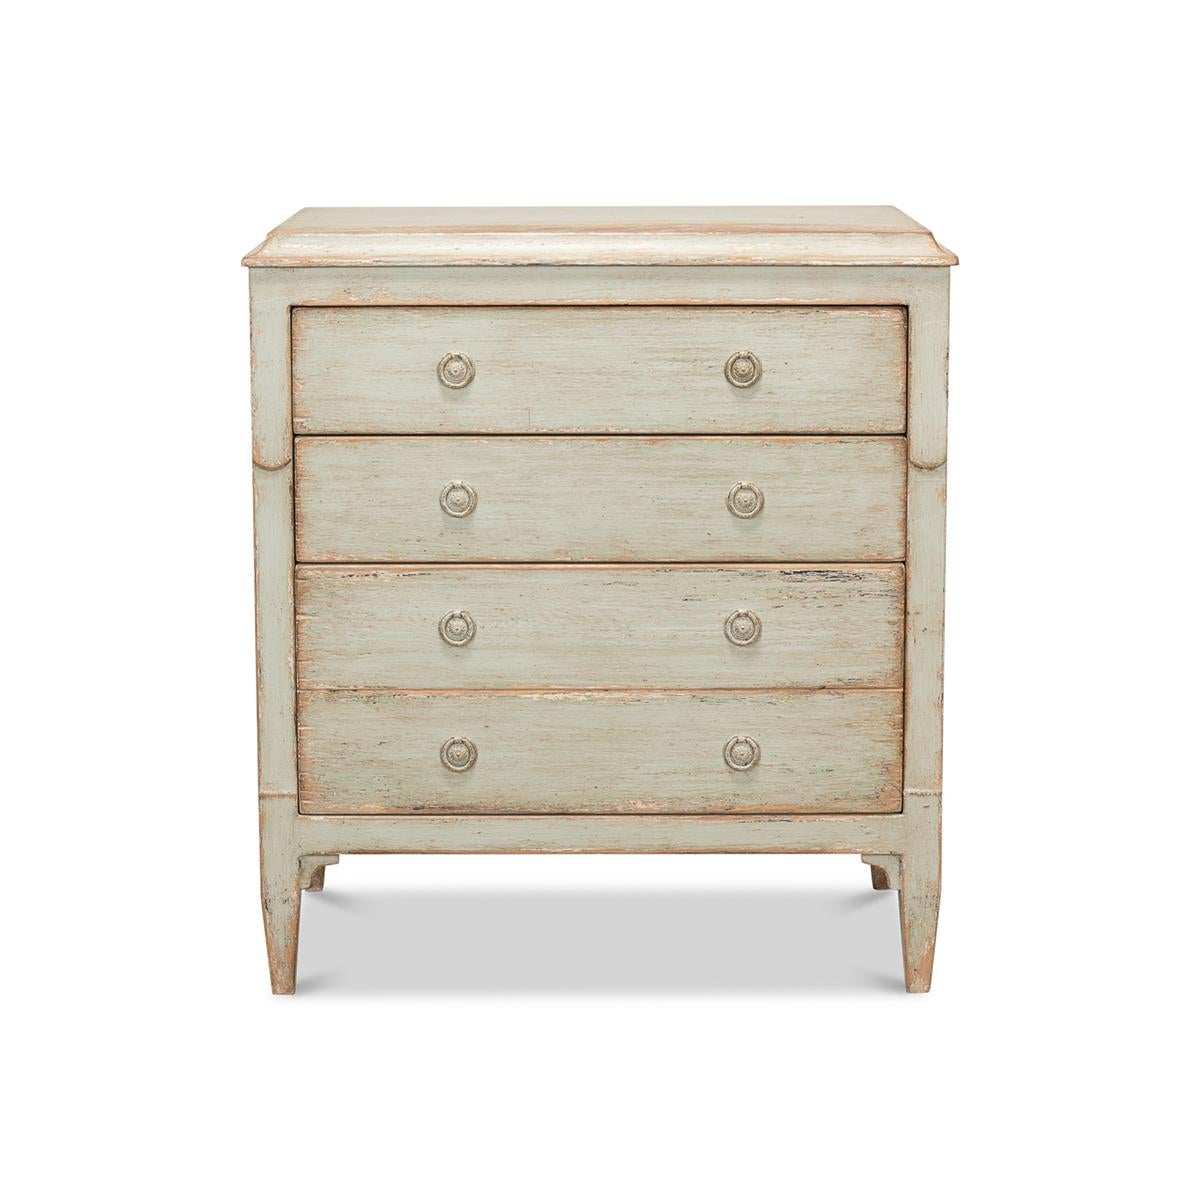 18th-century neo classically inspired sage-painted chest of drawers. With a molded edge rectangular top, paneled side, antiqued hardware and square tapered legs. This perfectly scaled three-drawer commode, constructed of reclaimed pine with a